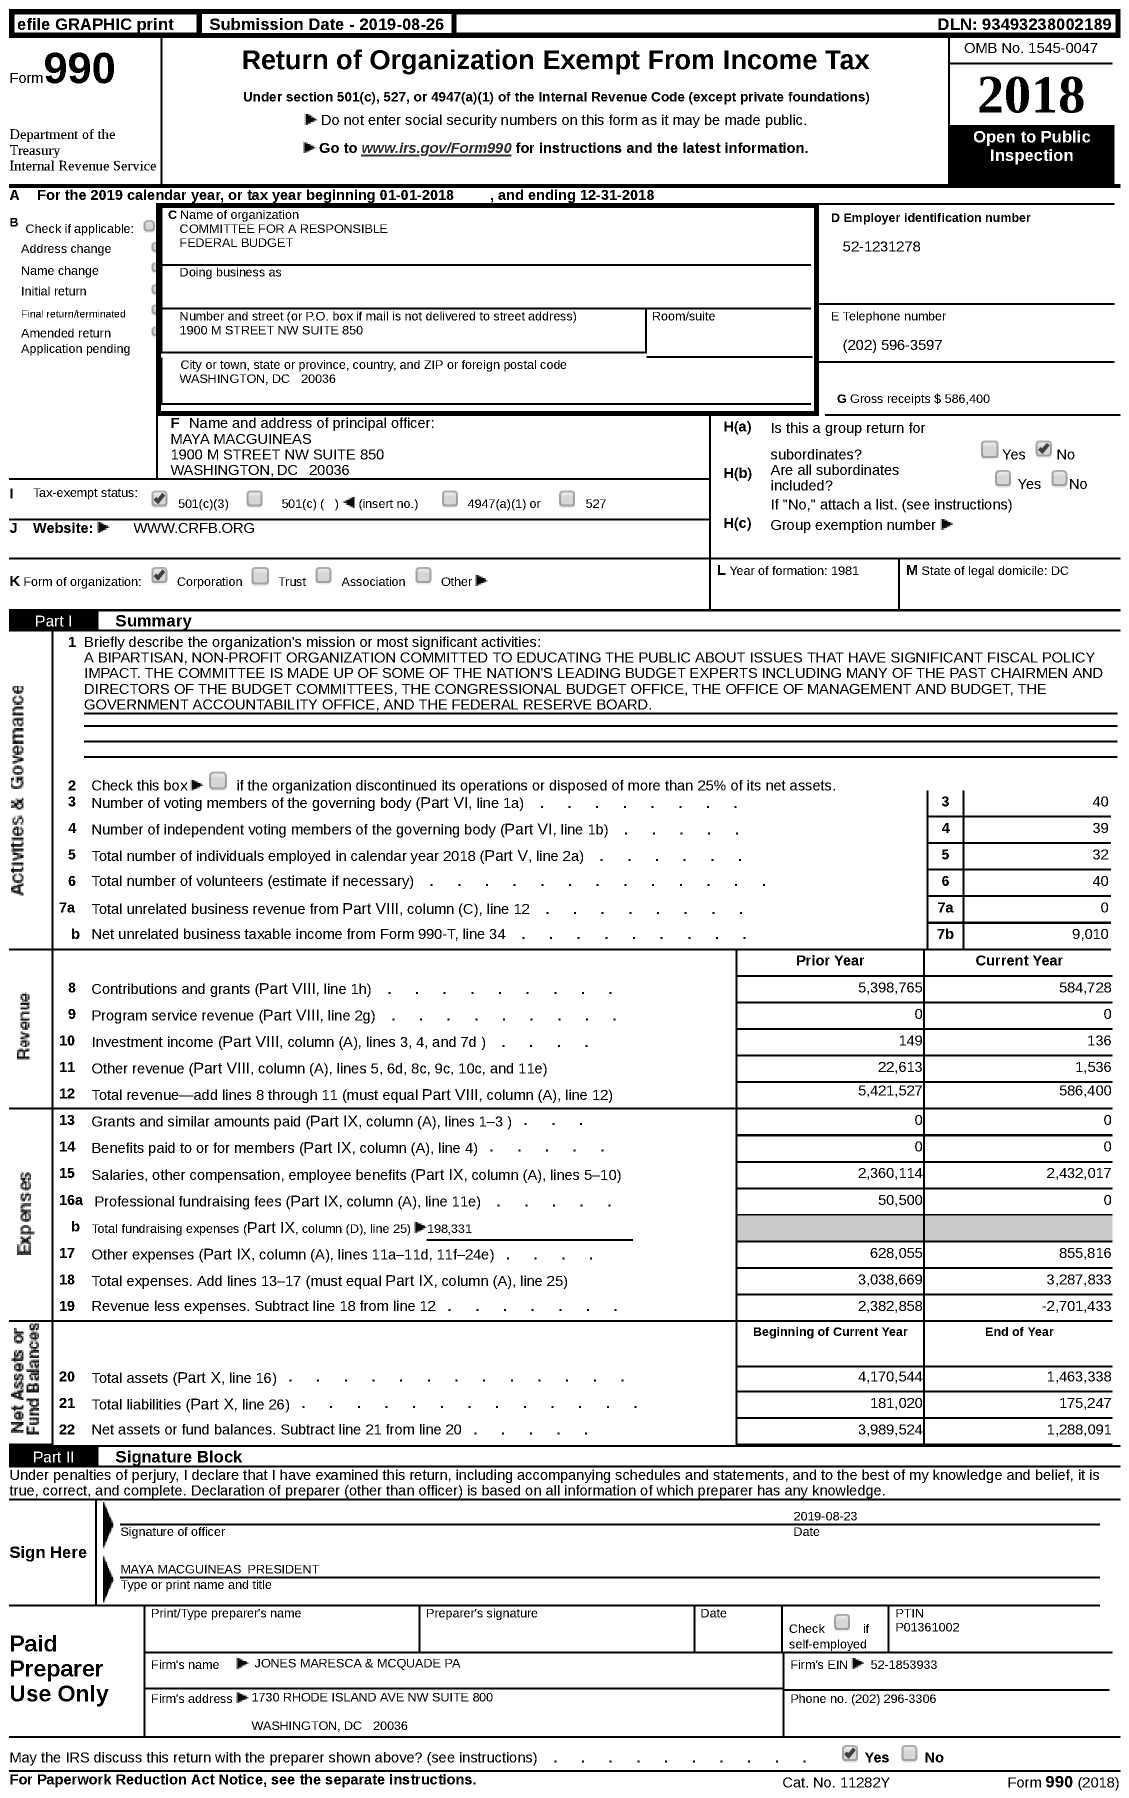 Image of first page of 2018 Form 990 for Committee for A Responsible Federal Budget